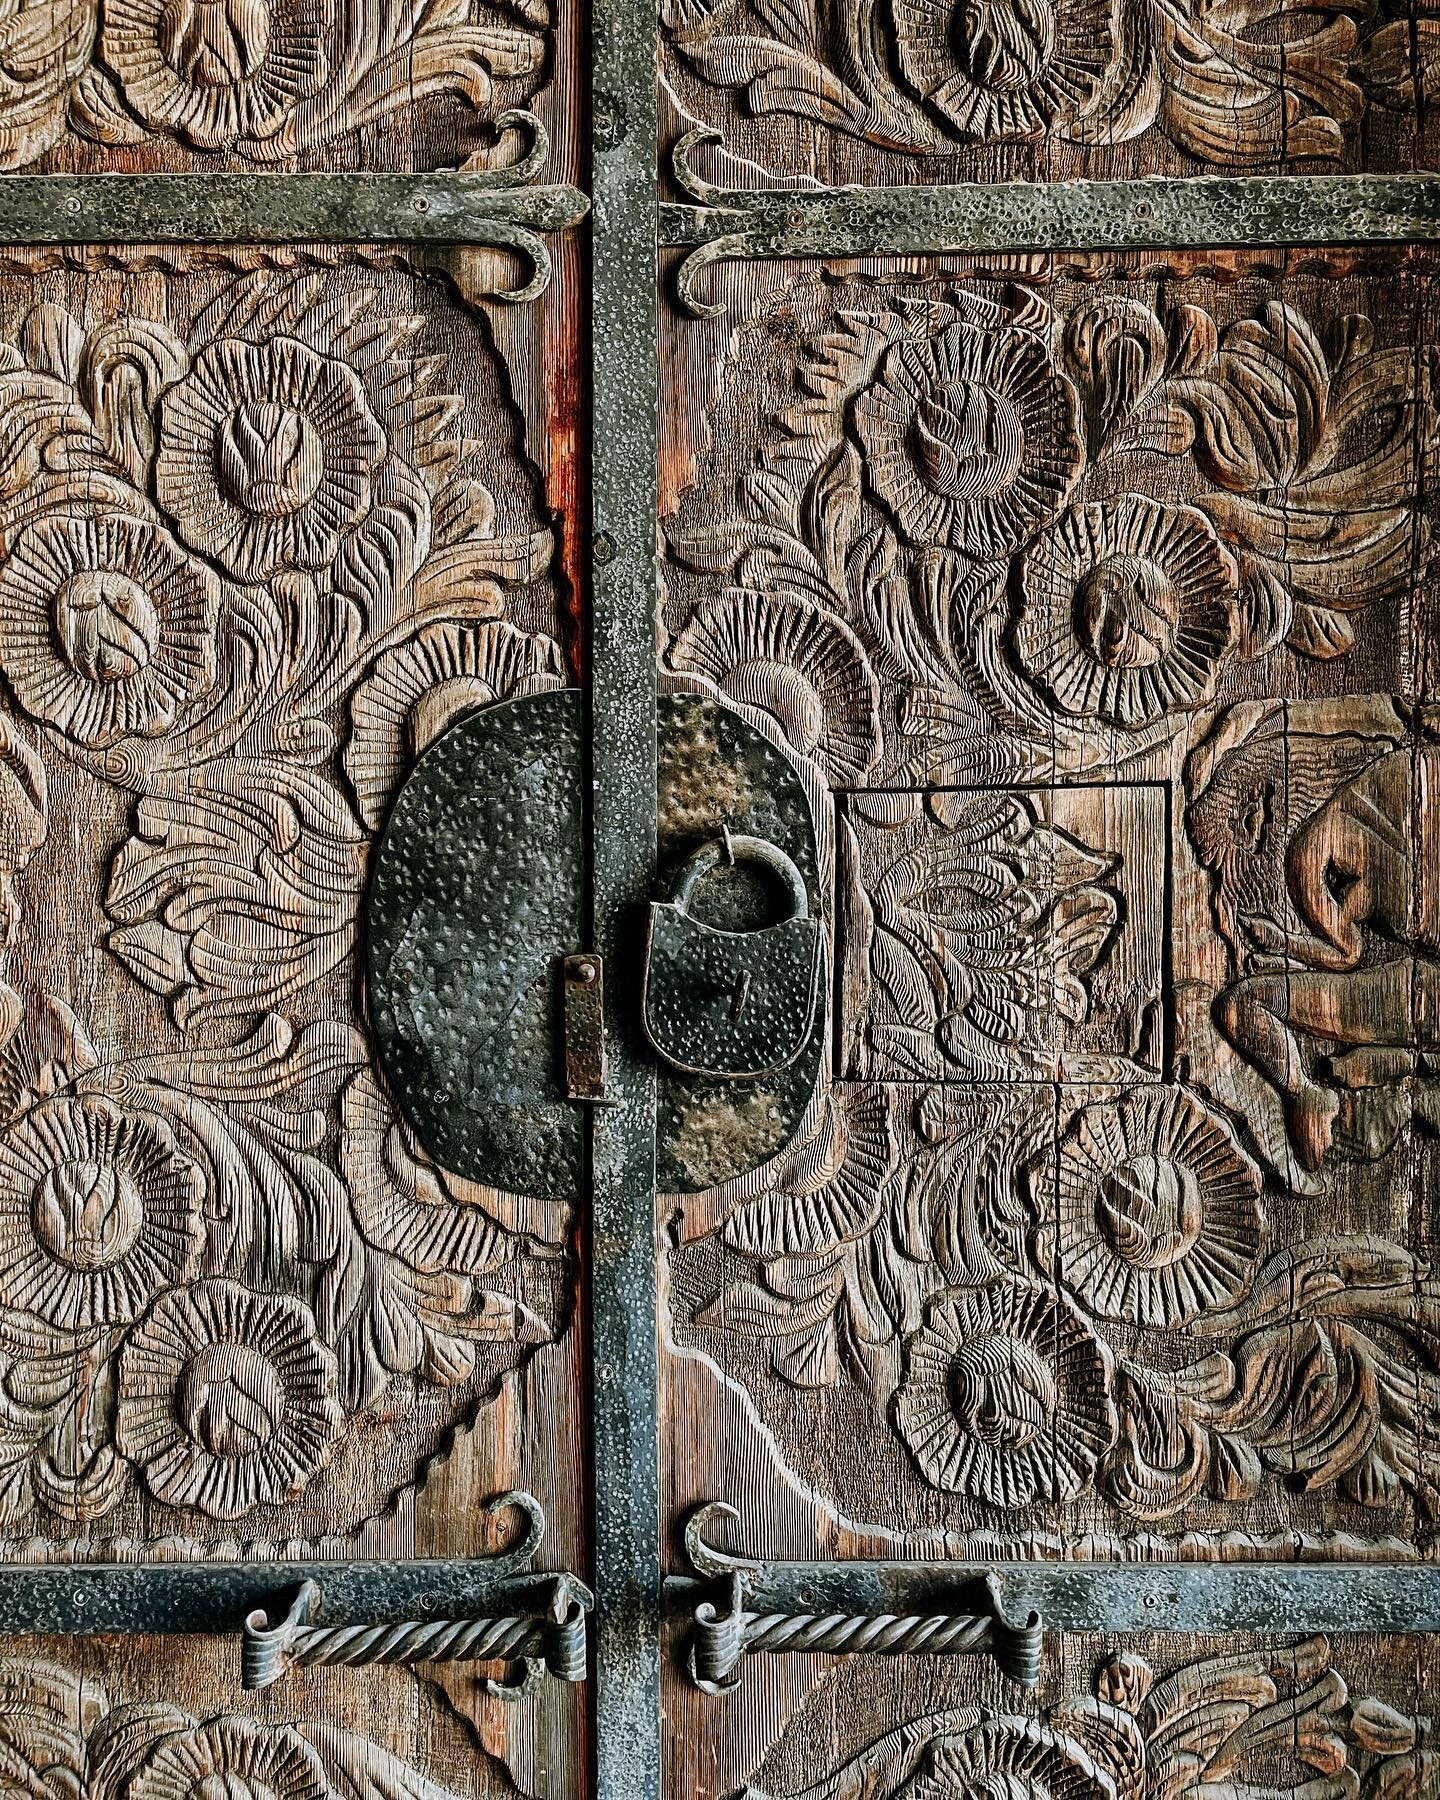 The detail on this door was just unbelievable. I wonder how old it is. I&rsquo;ll try to find out!